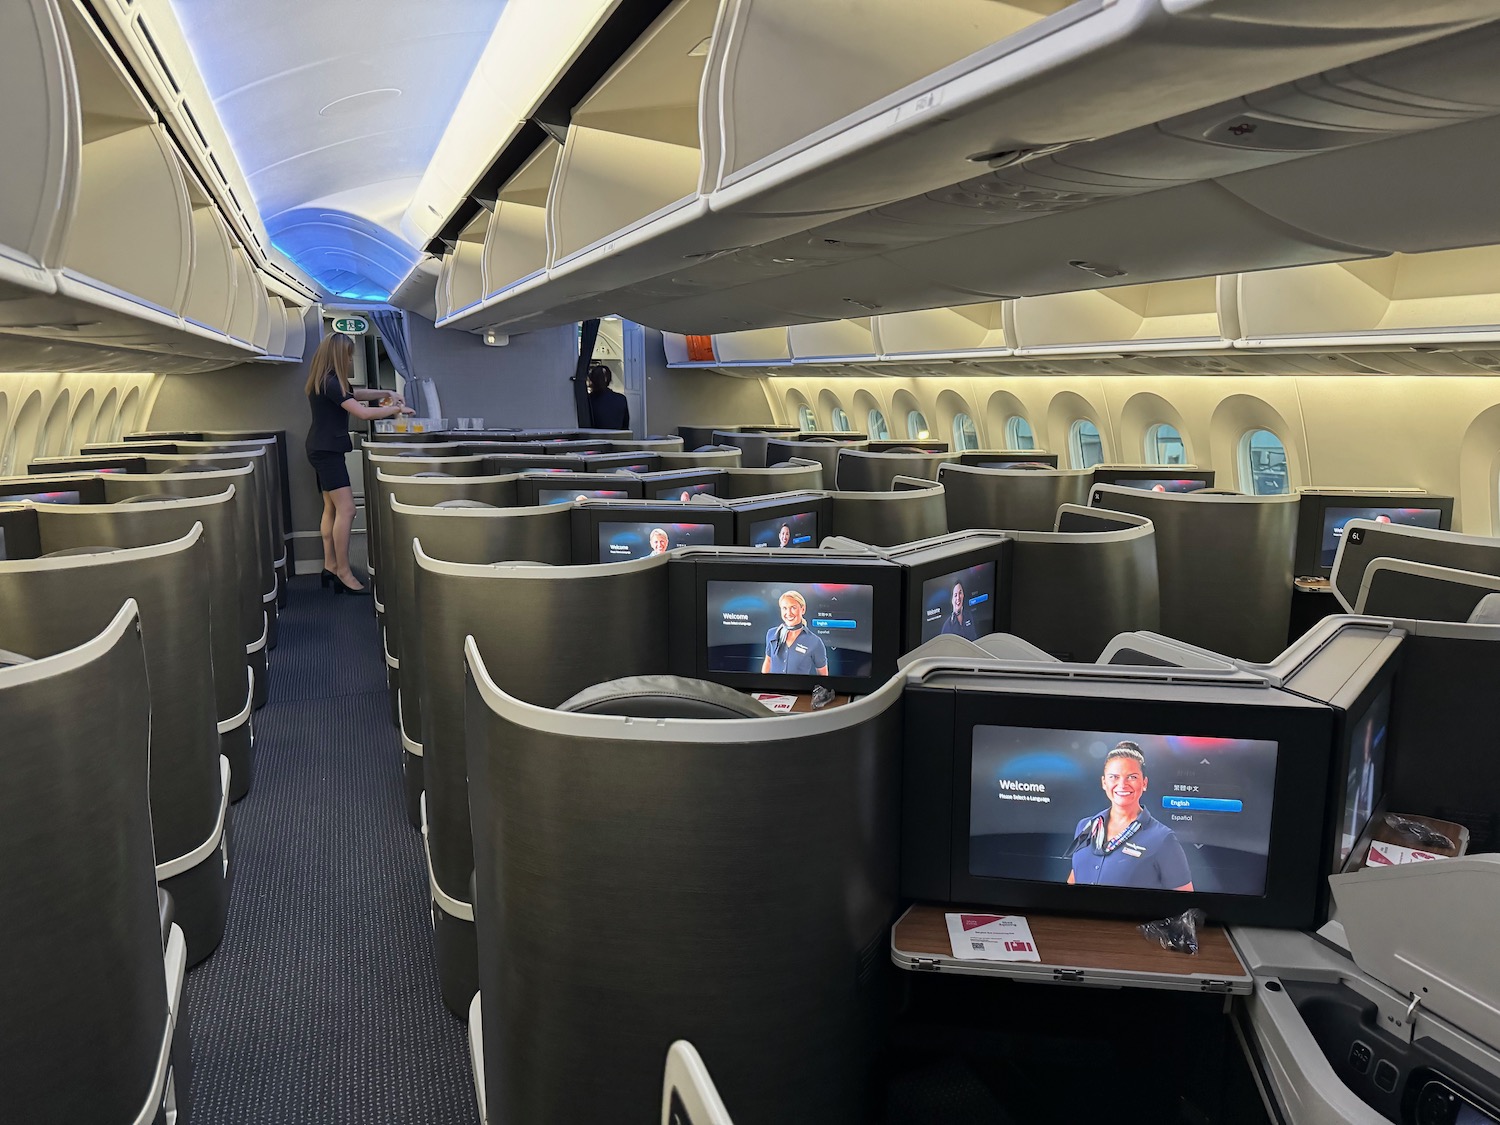 My Great Flight On American Airlines 787-9 In Business Class – Live and Let’s Fly